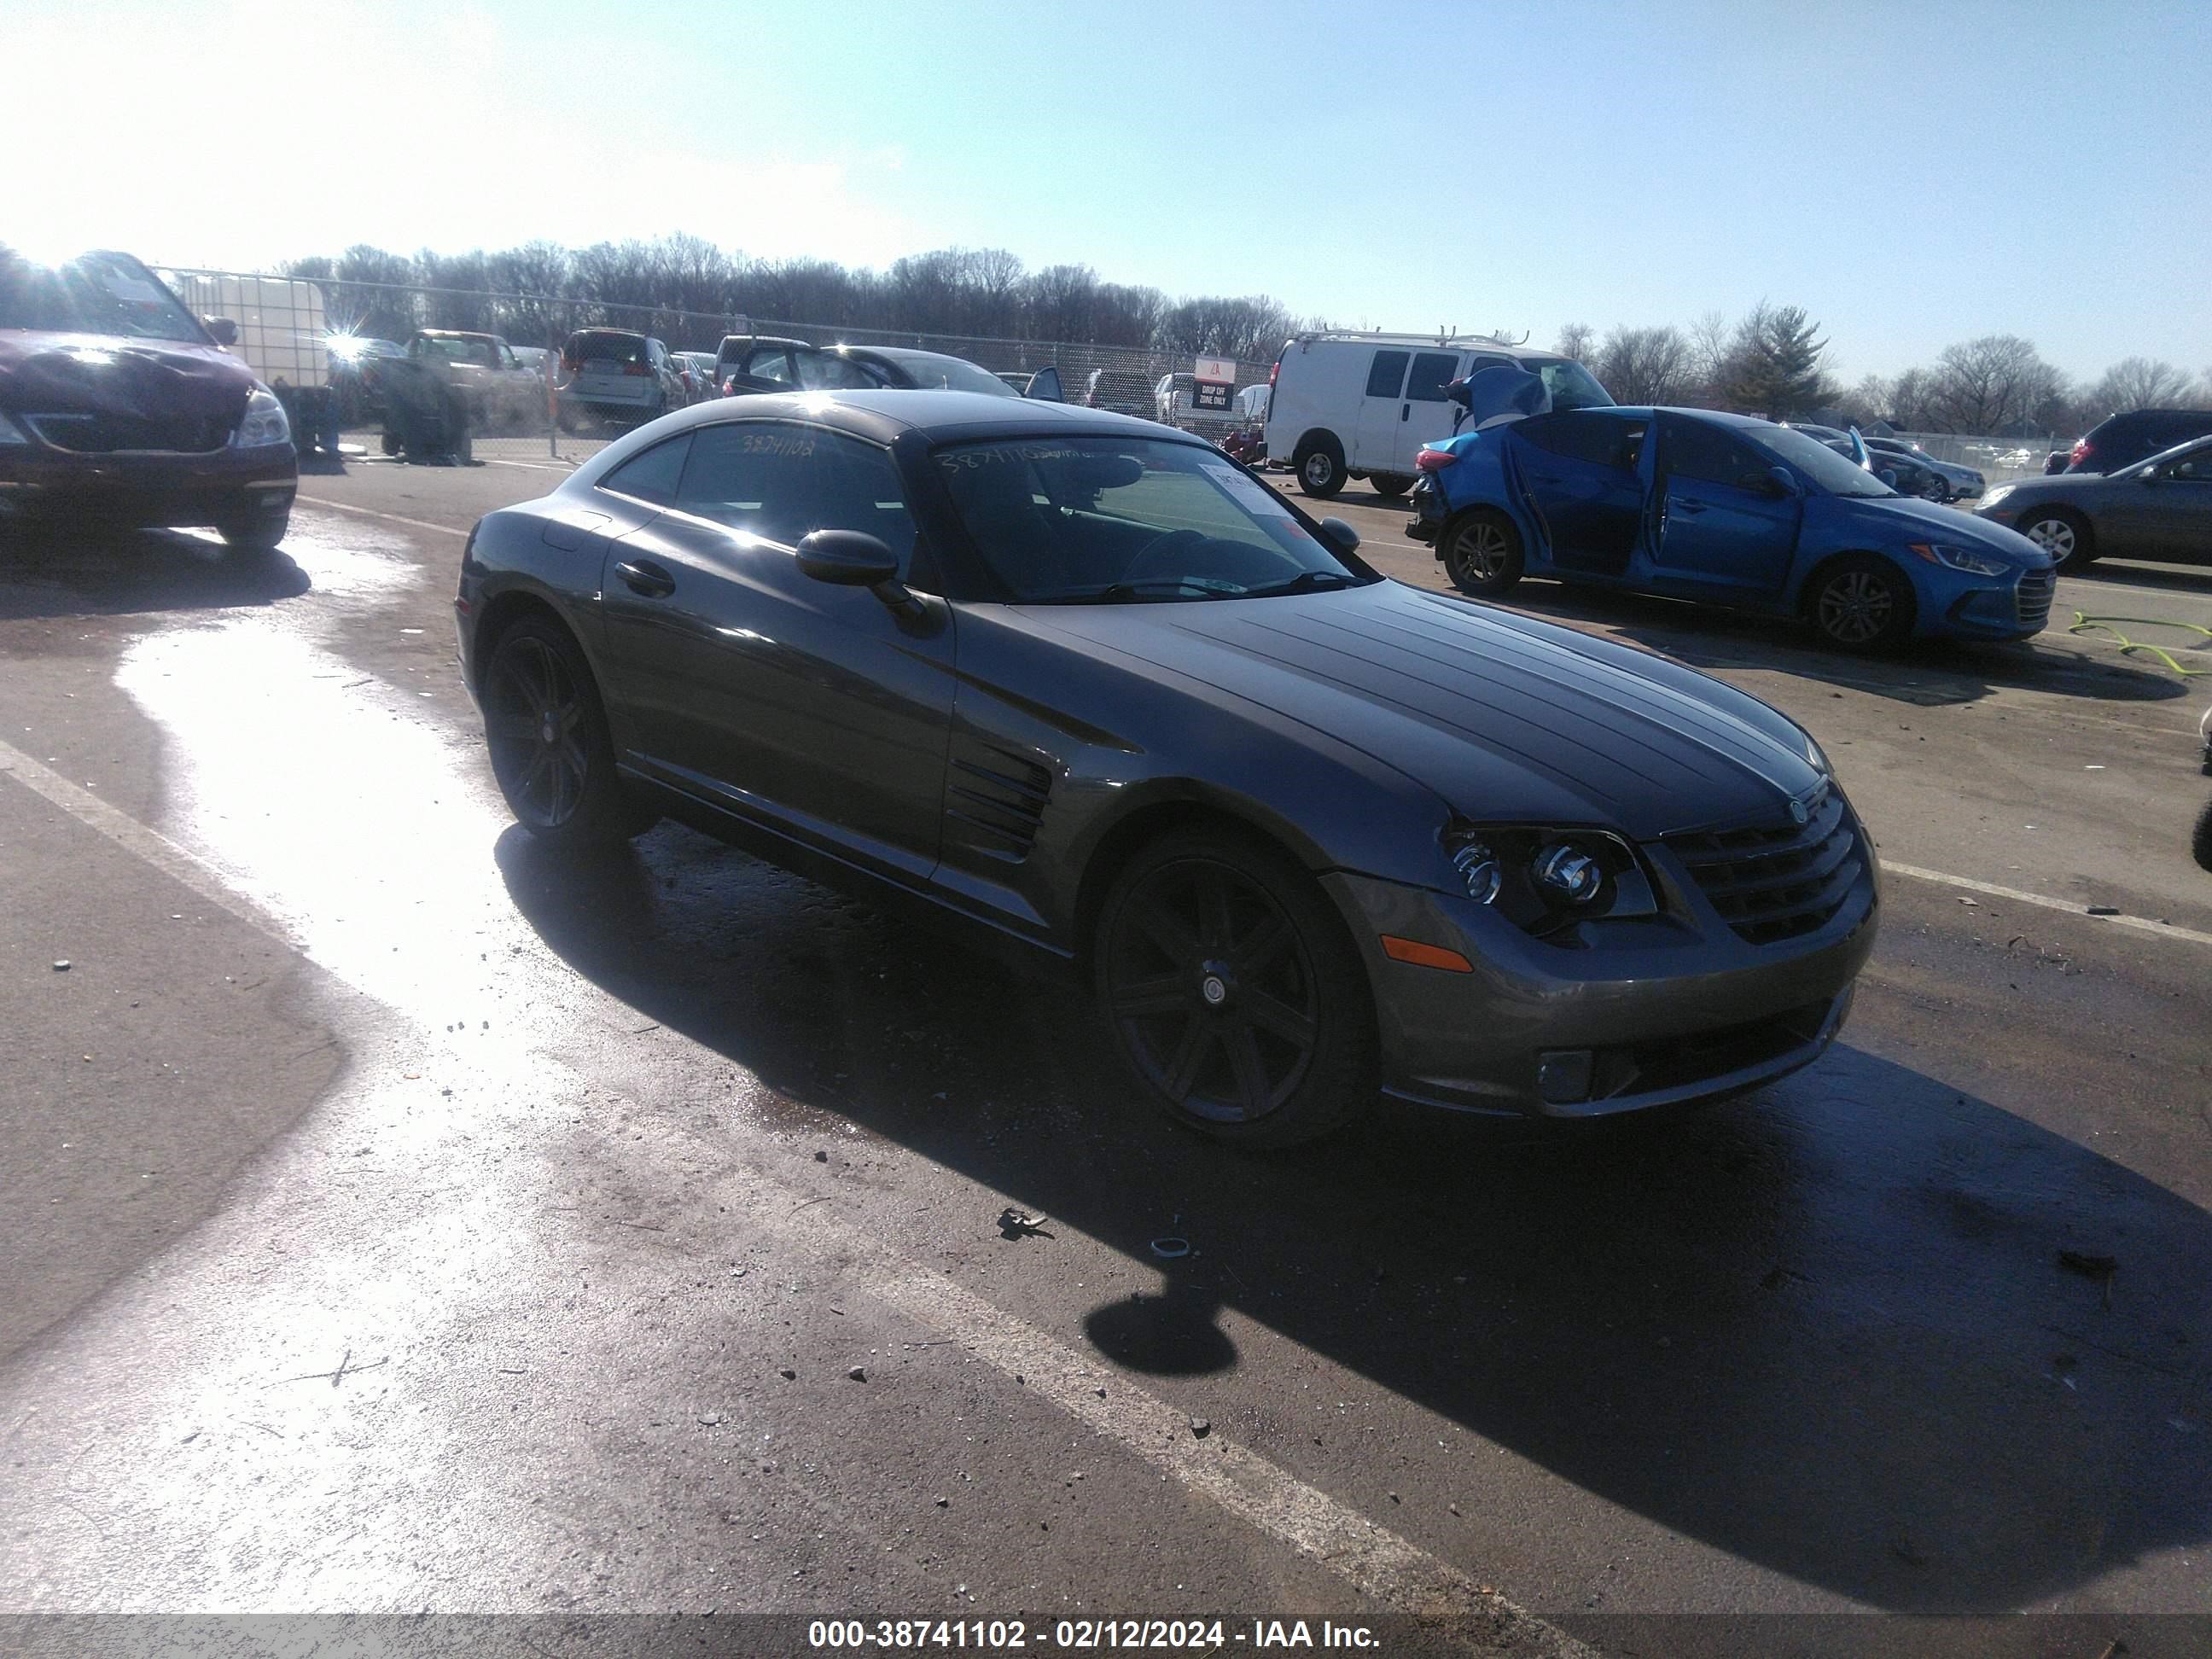 vin: 1C3AN69L04X019686 1C3AN69L04X019686 2004 chrysler crossfire 3200 for Sale in 46806, 4300 Oxford St., Fort Wayne, Indiana, USA